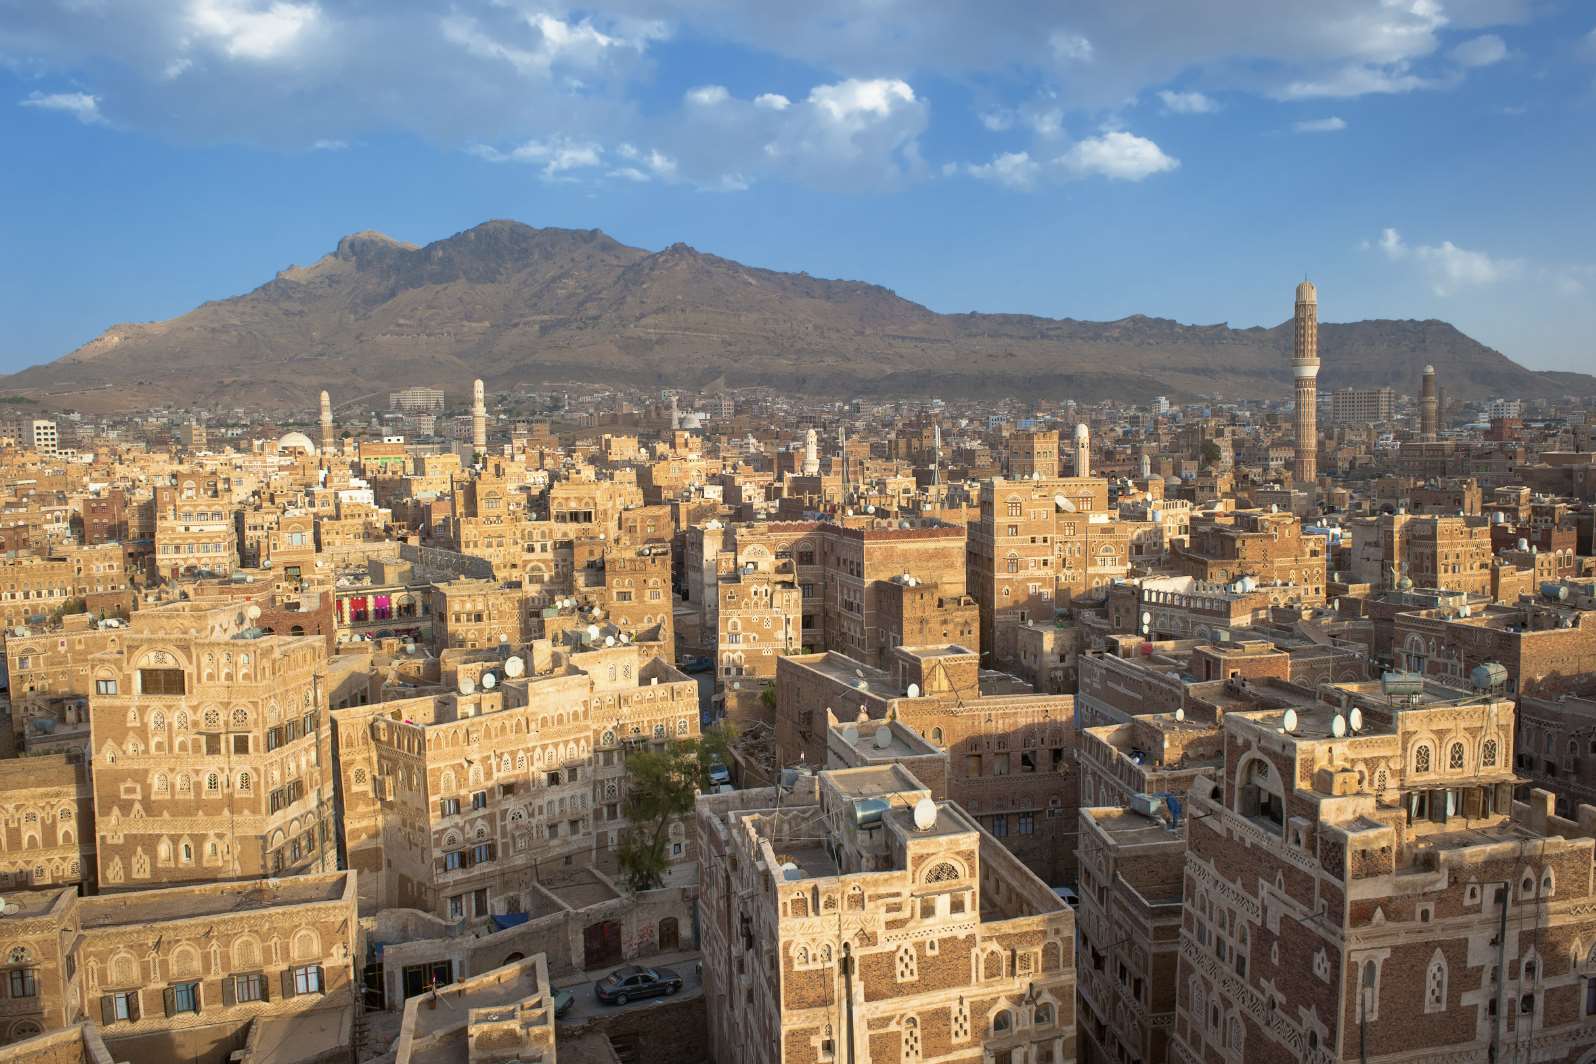 Luke Somers was kidnapped from Sanaa, the capital of Yemen